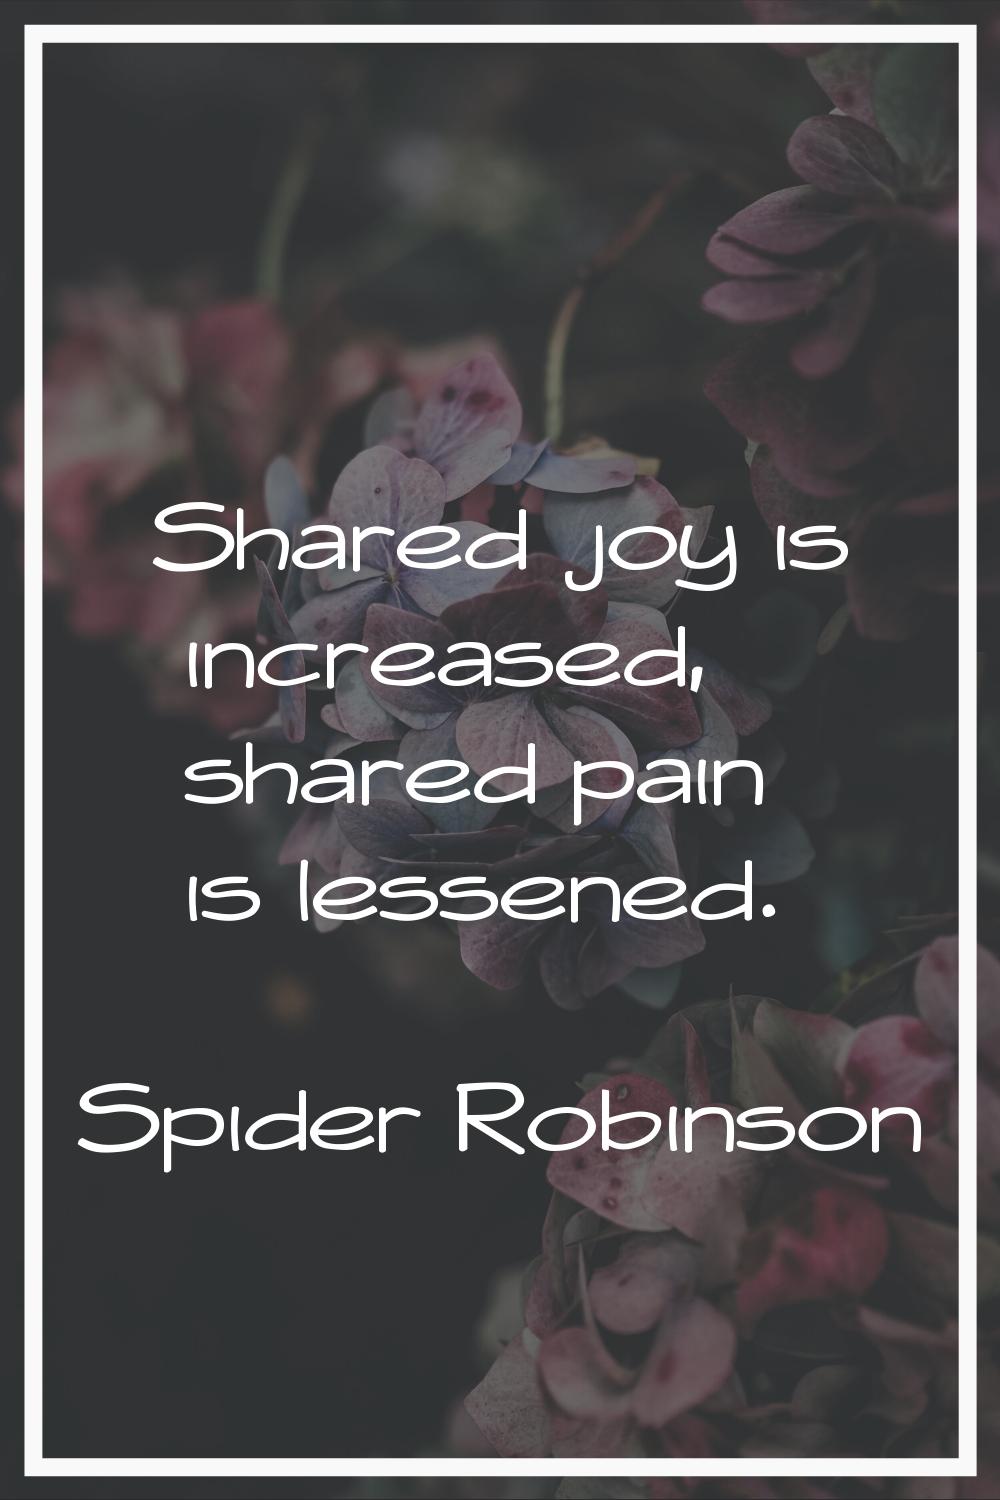 Shared joy is increased, shared pain is lessened.